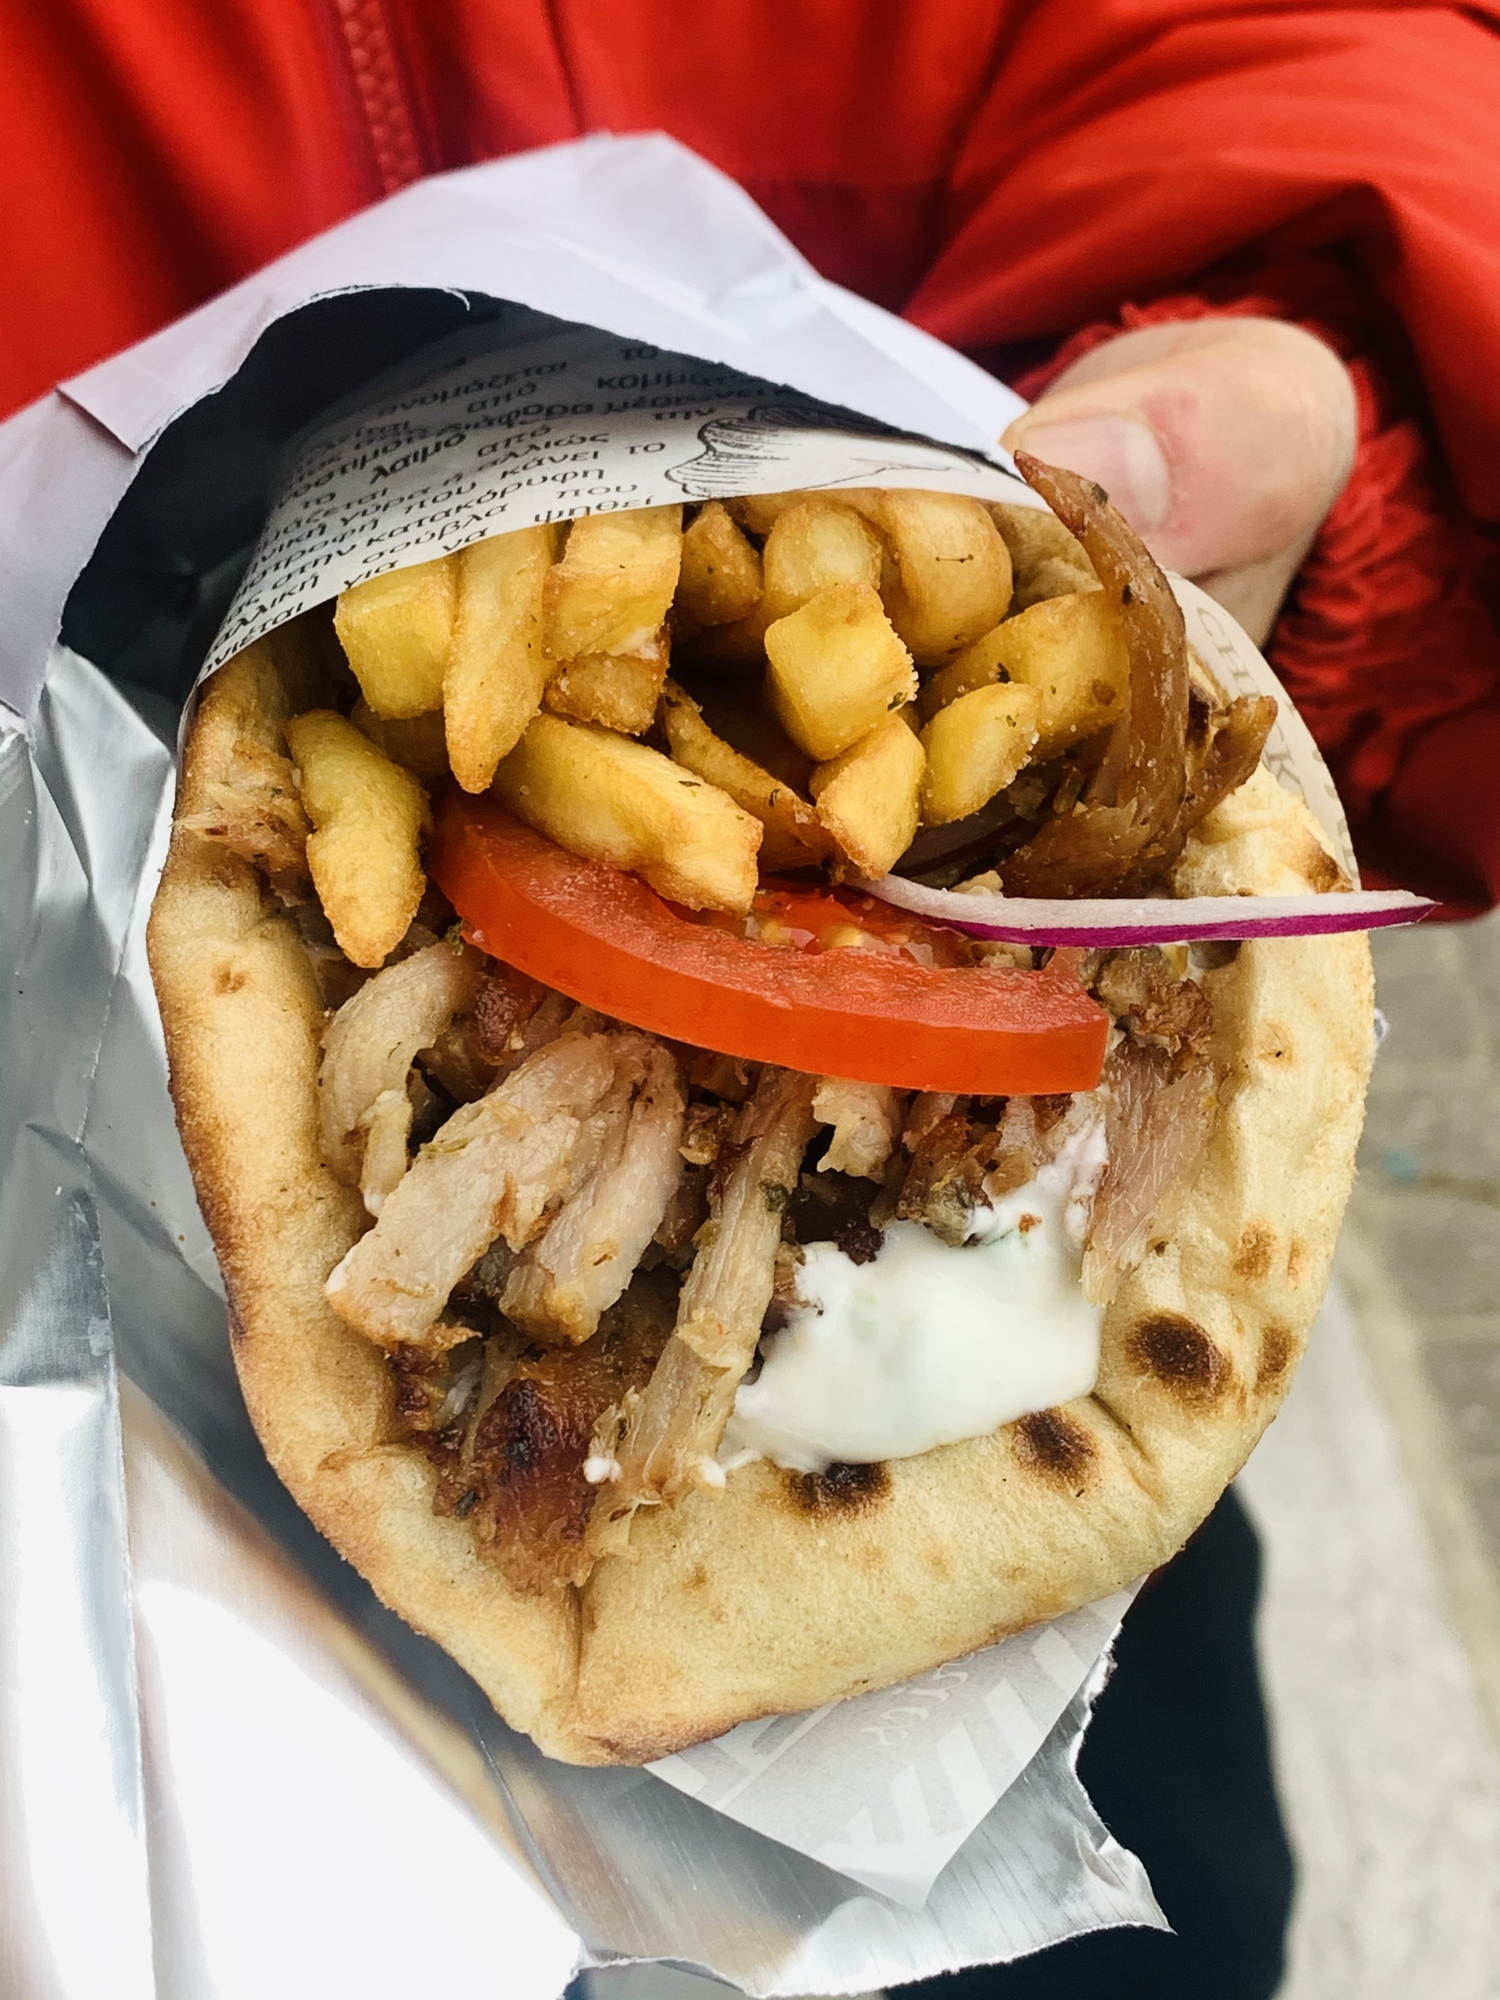 Close-up of a gyro with meat, fries, tomato, and sauce in pita, held in hand